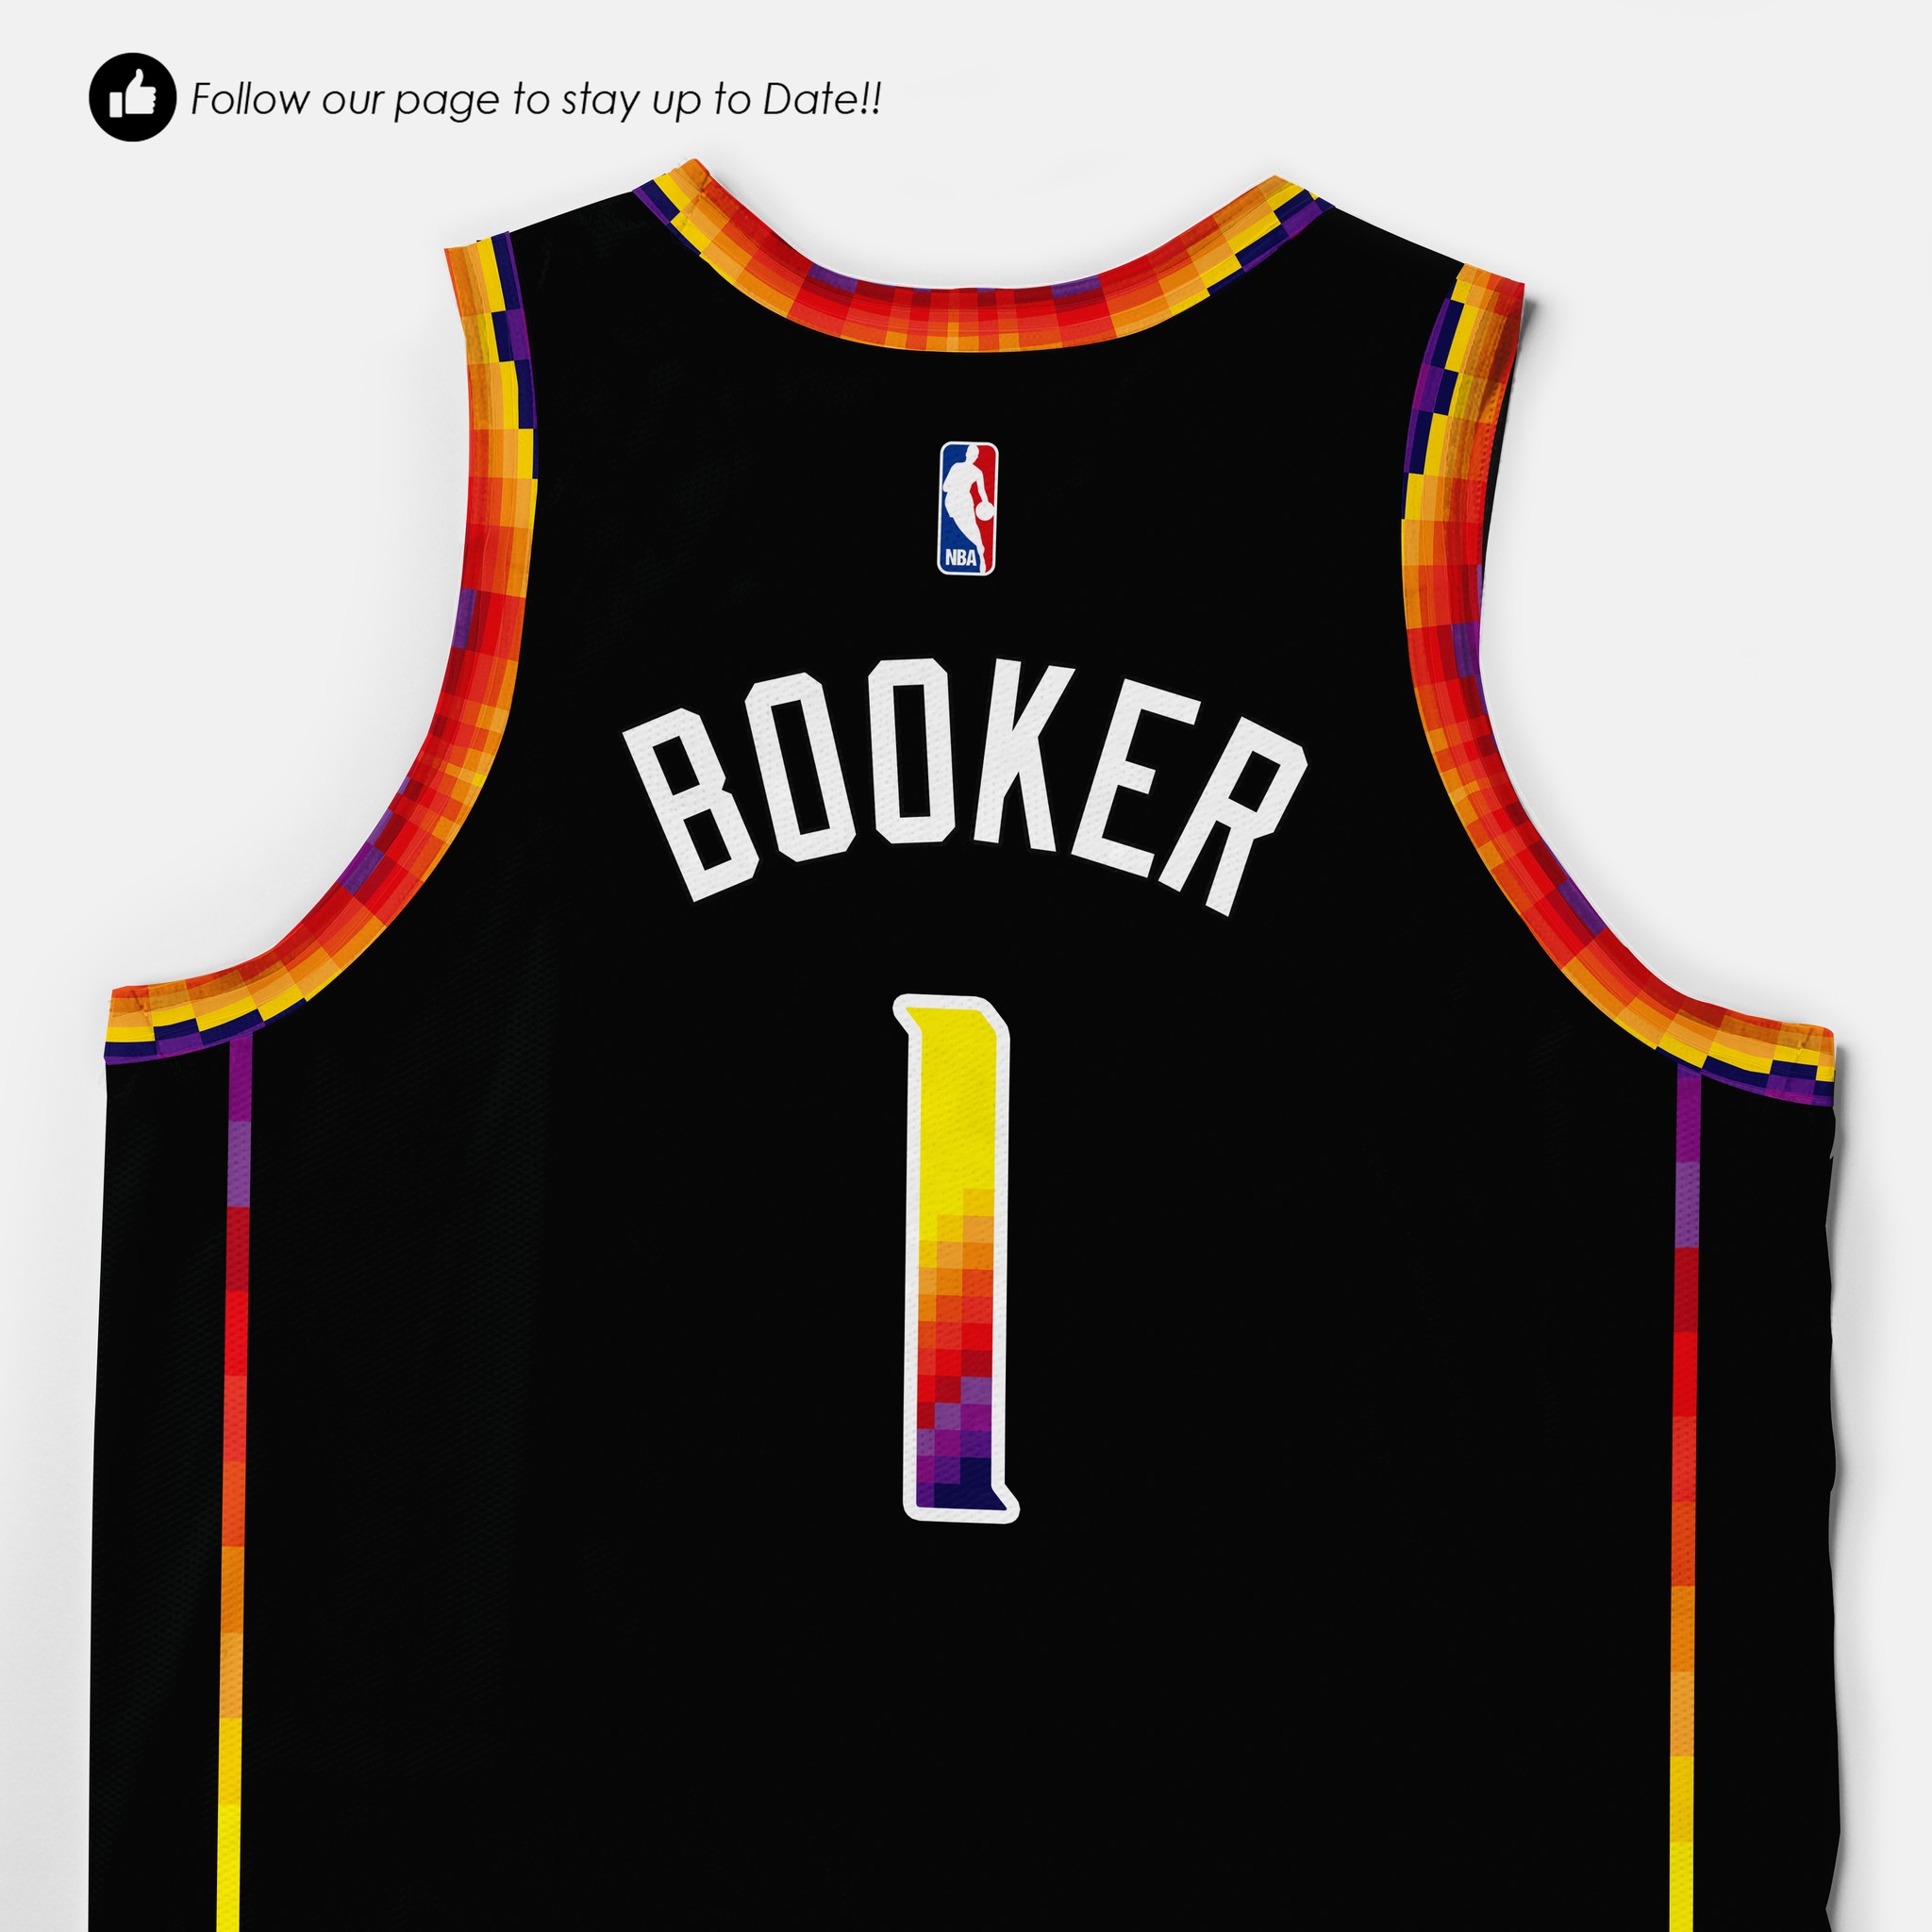 HG PHOENIX SUNS BOOKER CONCEPT FULL SUBLIMATION JERSEY BASKETBALL JERSEY  FREE CUSTOMIZE OF NAME AND NUMBER